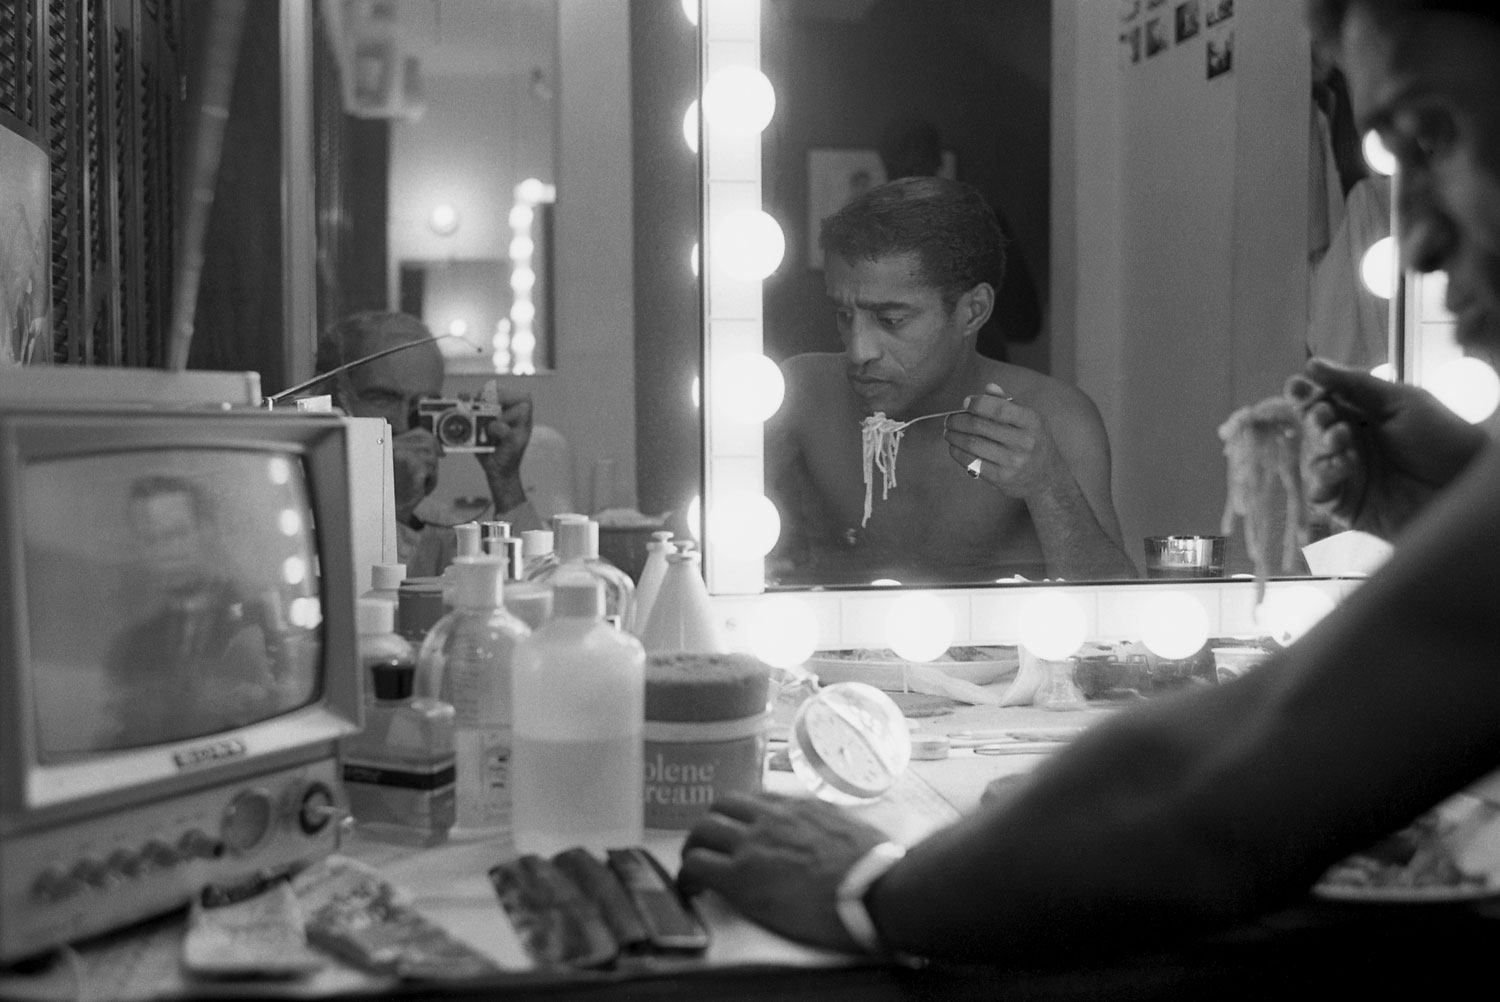 Sammy Davis Jr. eats spaghetti in his backstage dressing room in Golden Boy. Photographer Leonard McCombe is relected in the mirror.